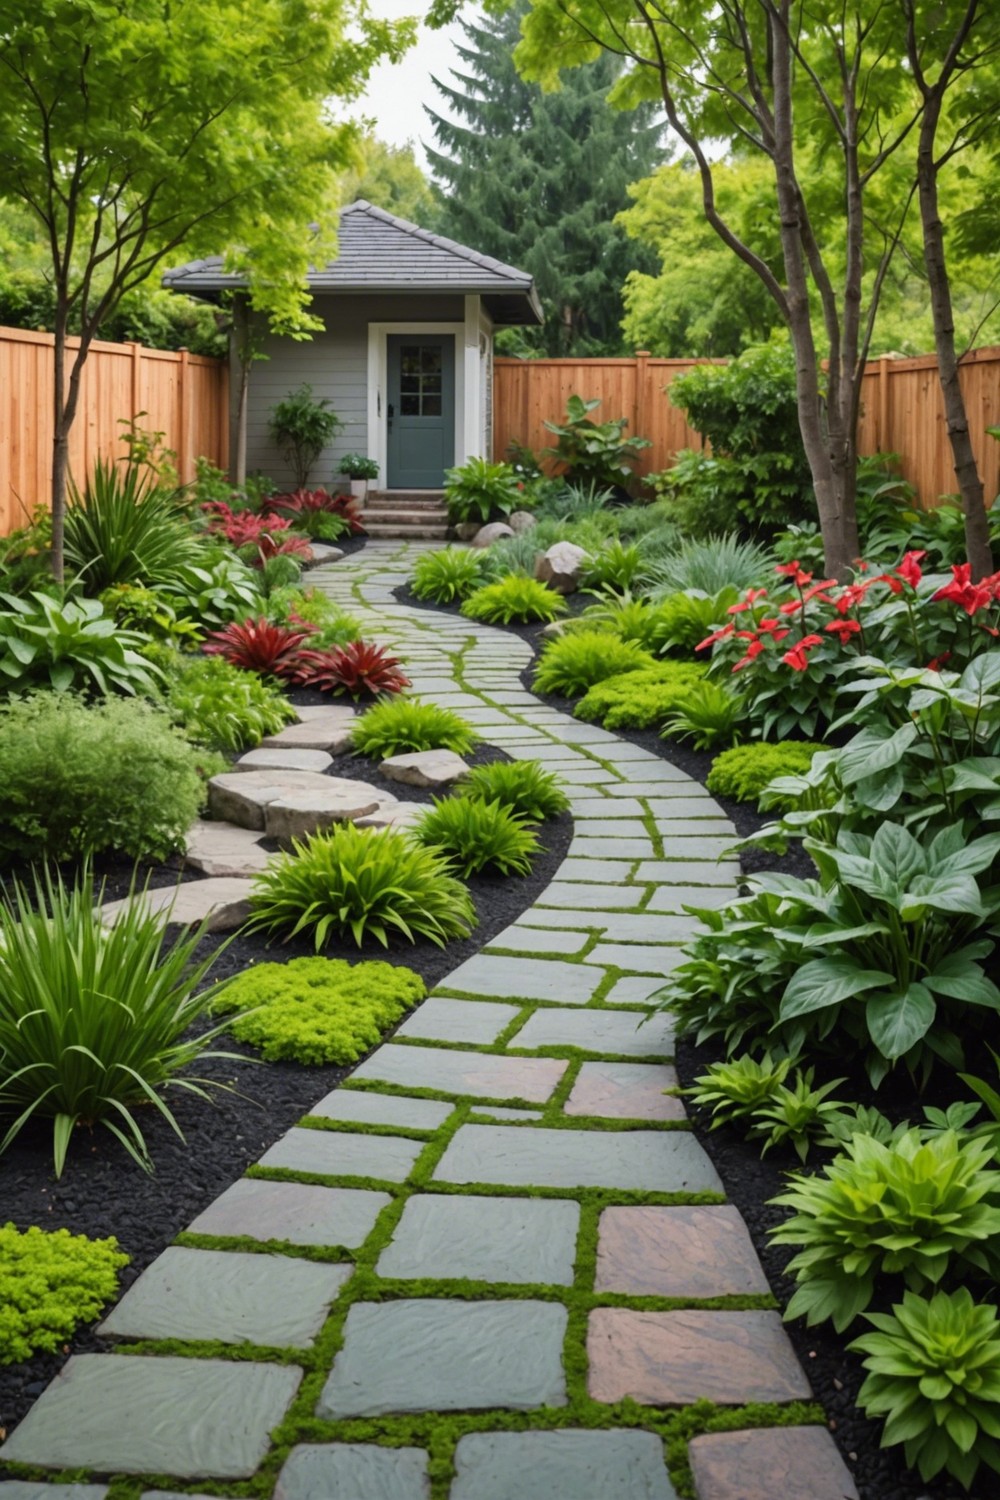 Use Permeable Pavers for PATHWAYS